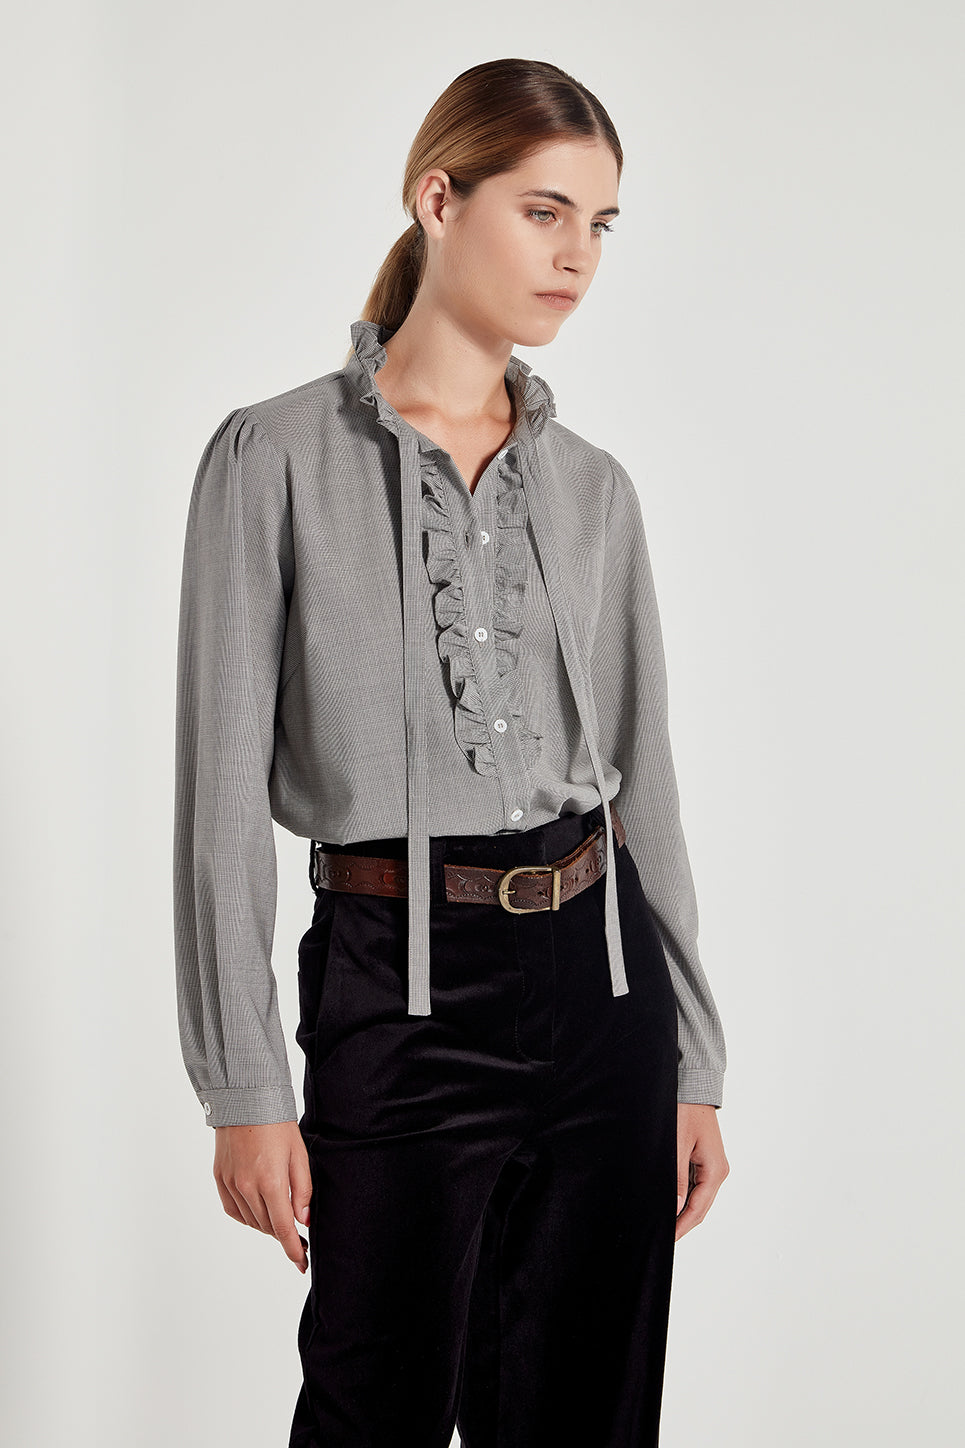 The Florence Blouse in Micro Houndstooth